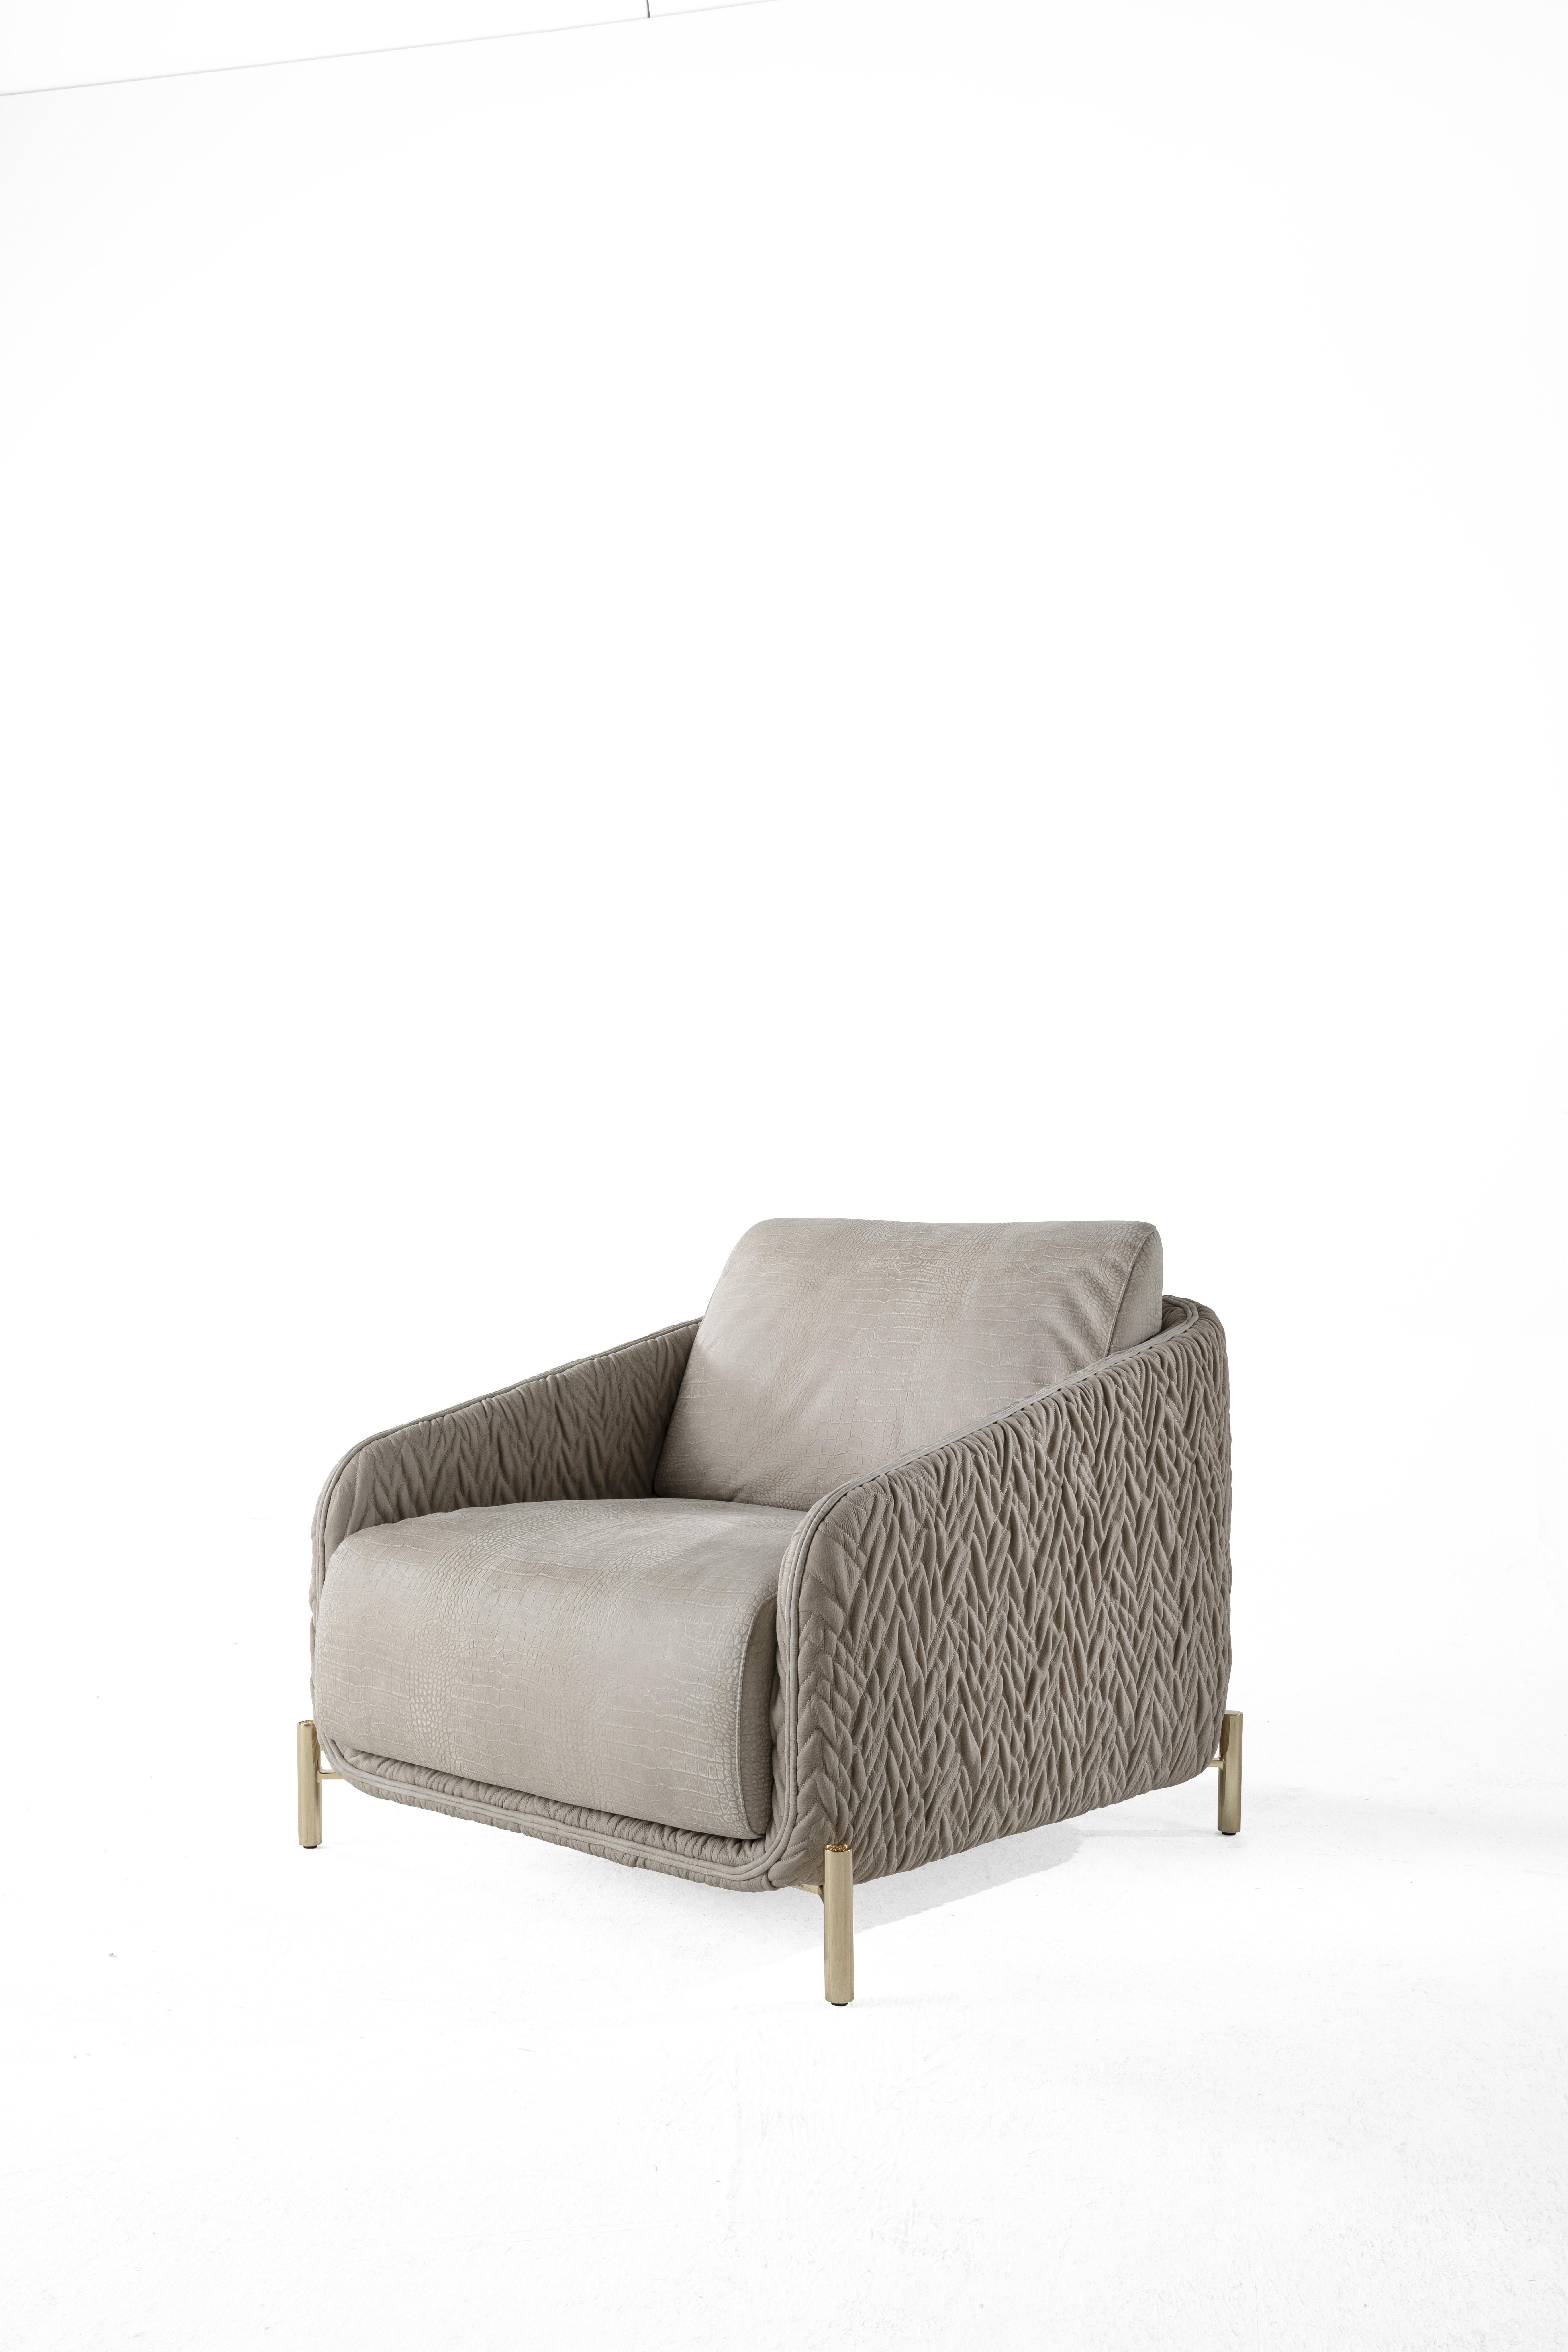 21st Century Clifton Armchair in Leather by Roberto Cavalli Home Interiors In New Condition For Sale In Cantù, Lombardia